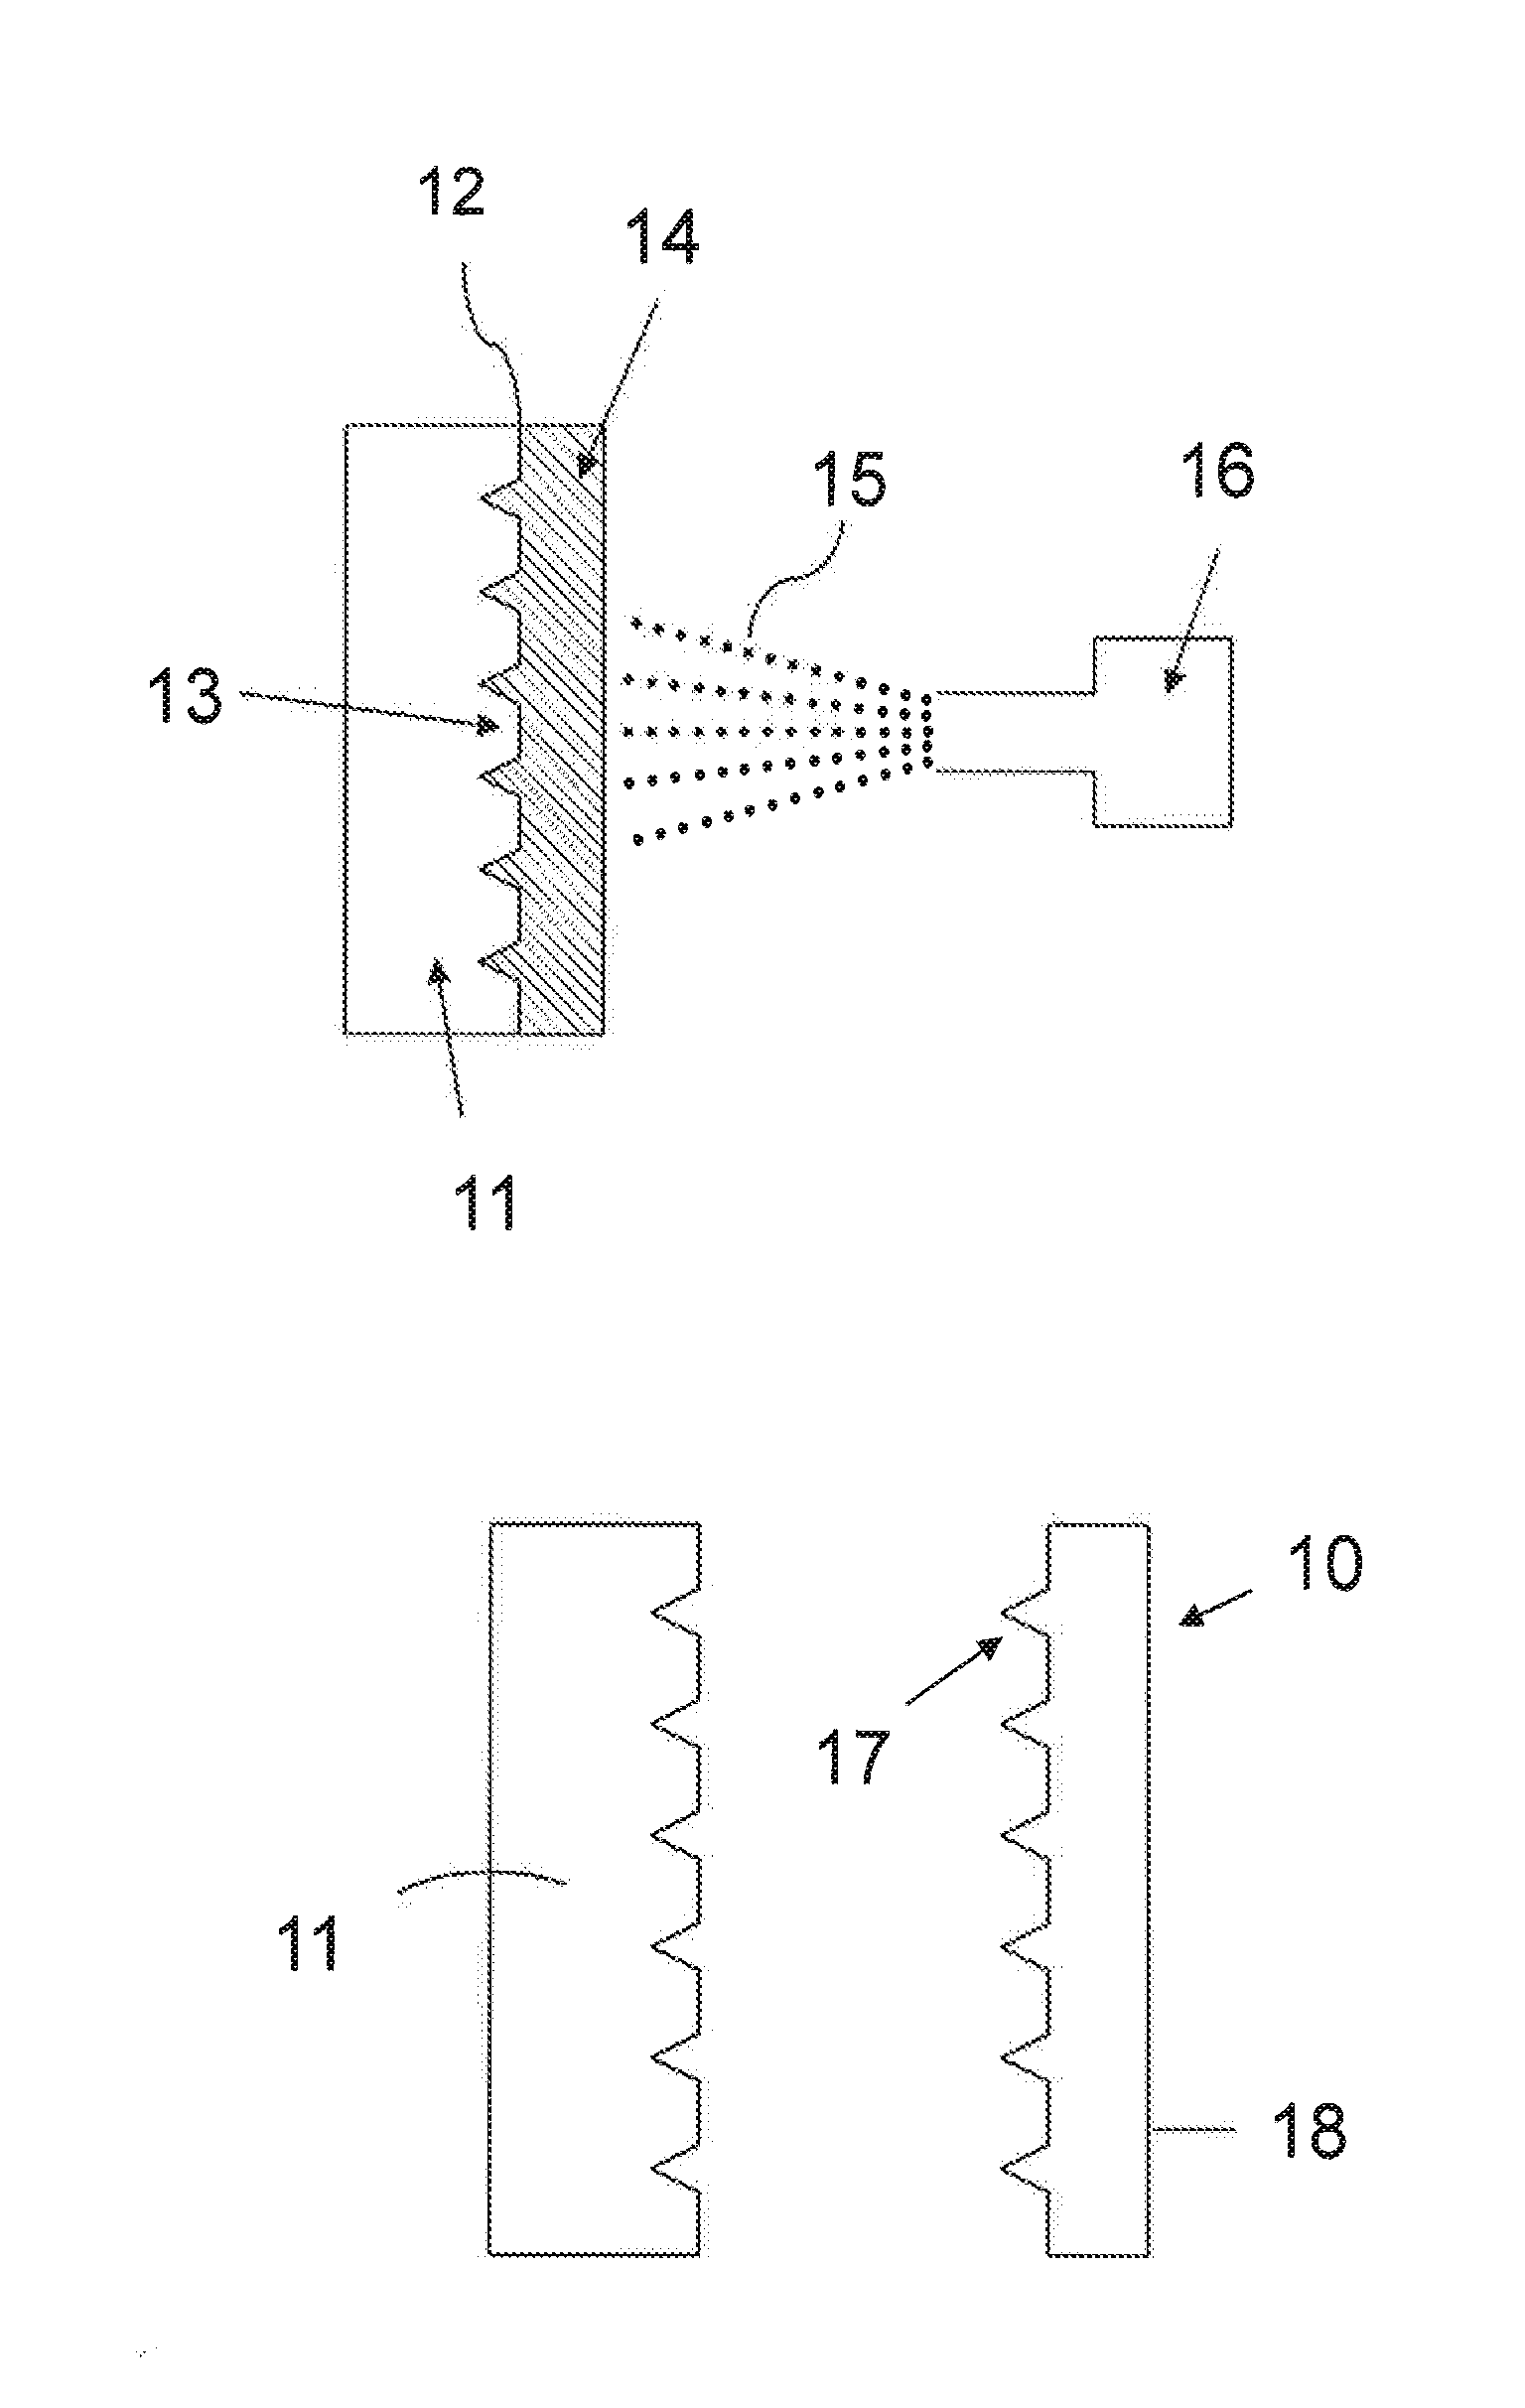 Riblet Foil and Method for Producing Same